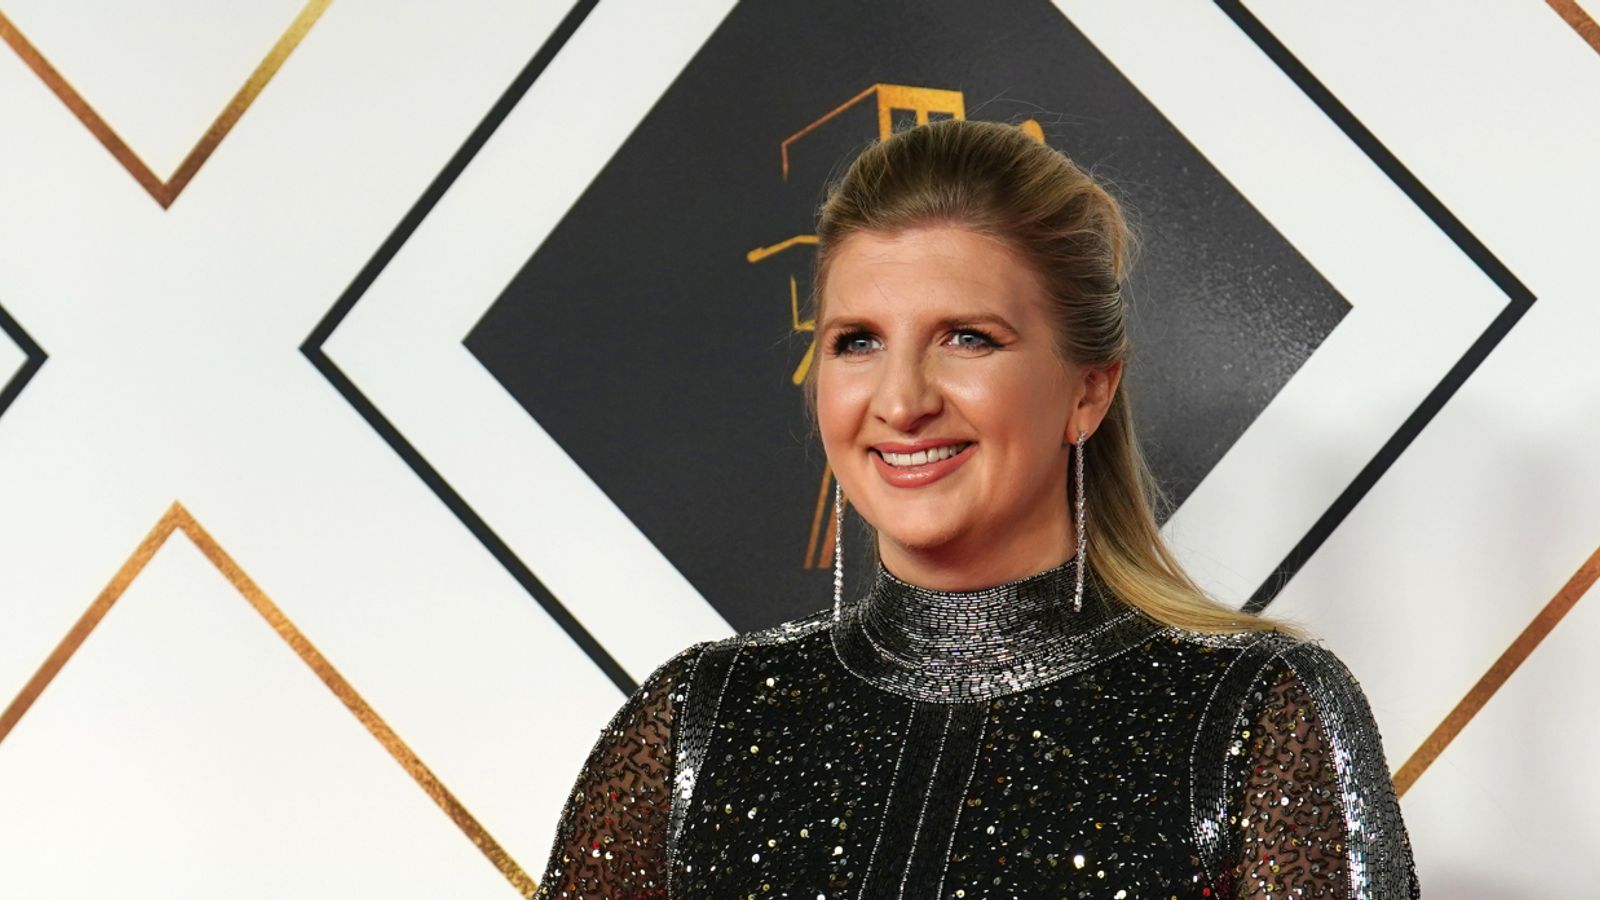 Rebecca Adlington reveals late miscarriage of baby daughter, saying she is 'truly heartbroken'